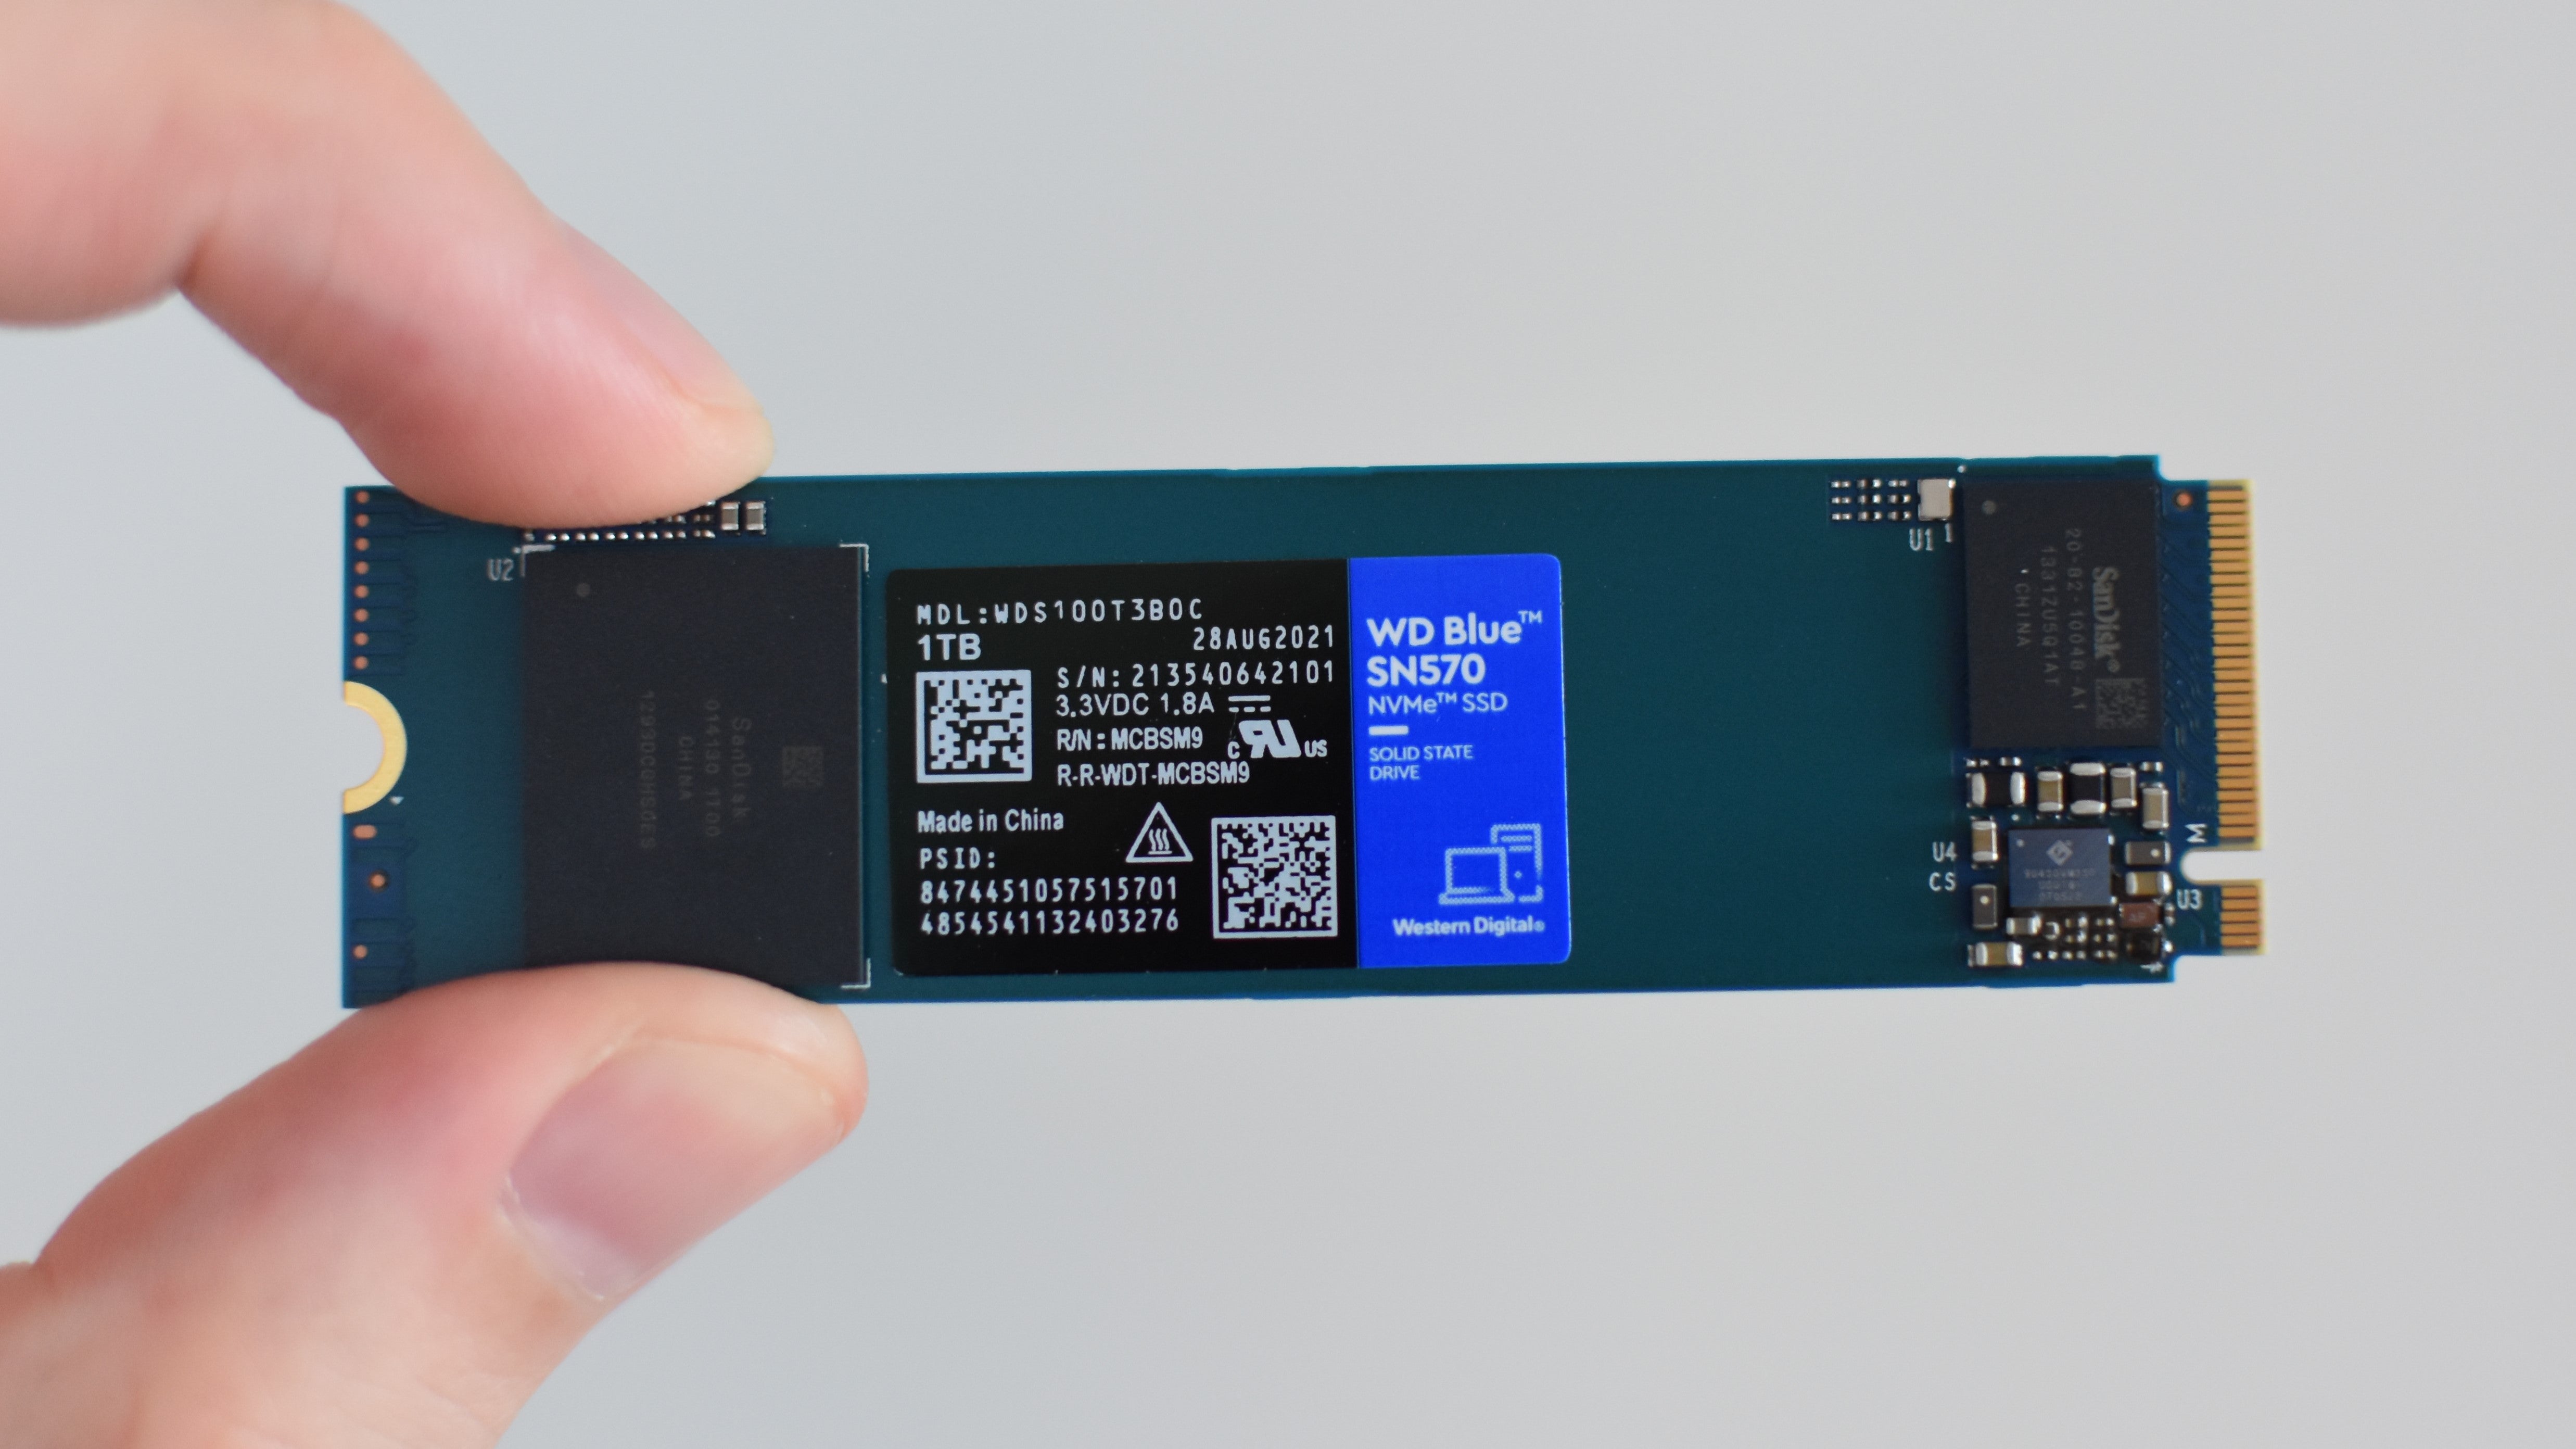 Get a 2TB WD Blue SN570 NVMe SSD for $162 for Father's Day | Rock 